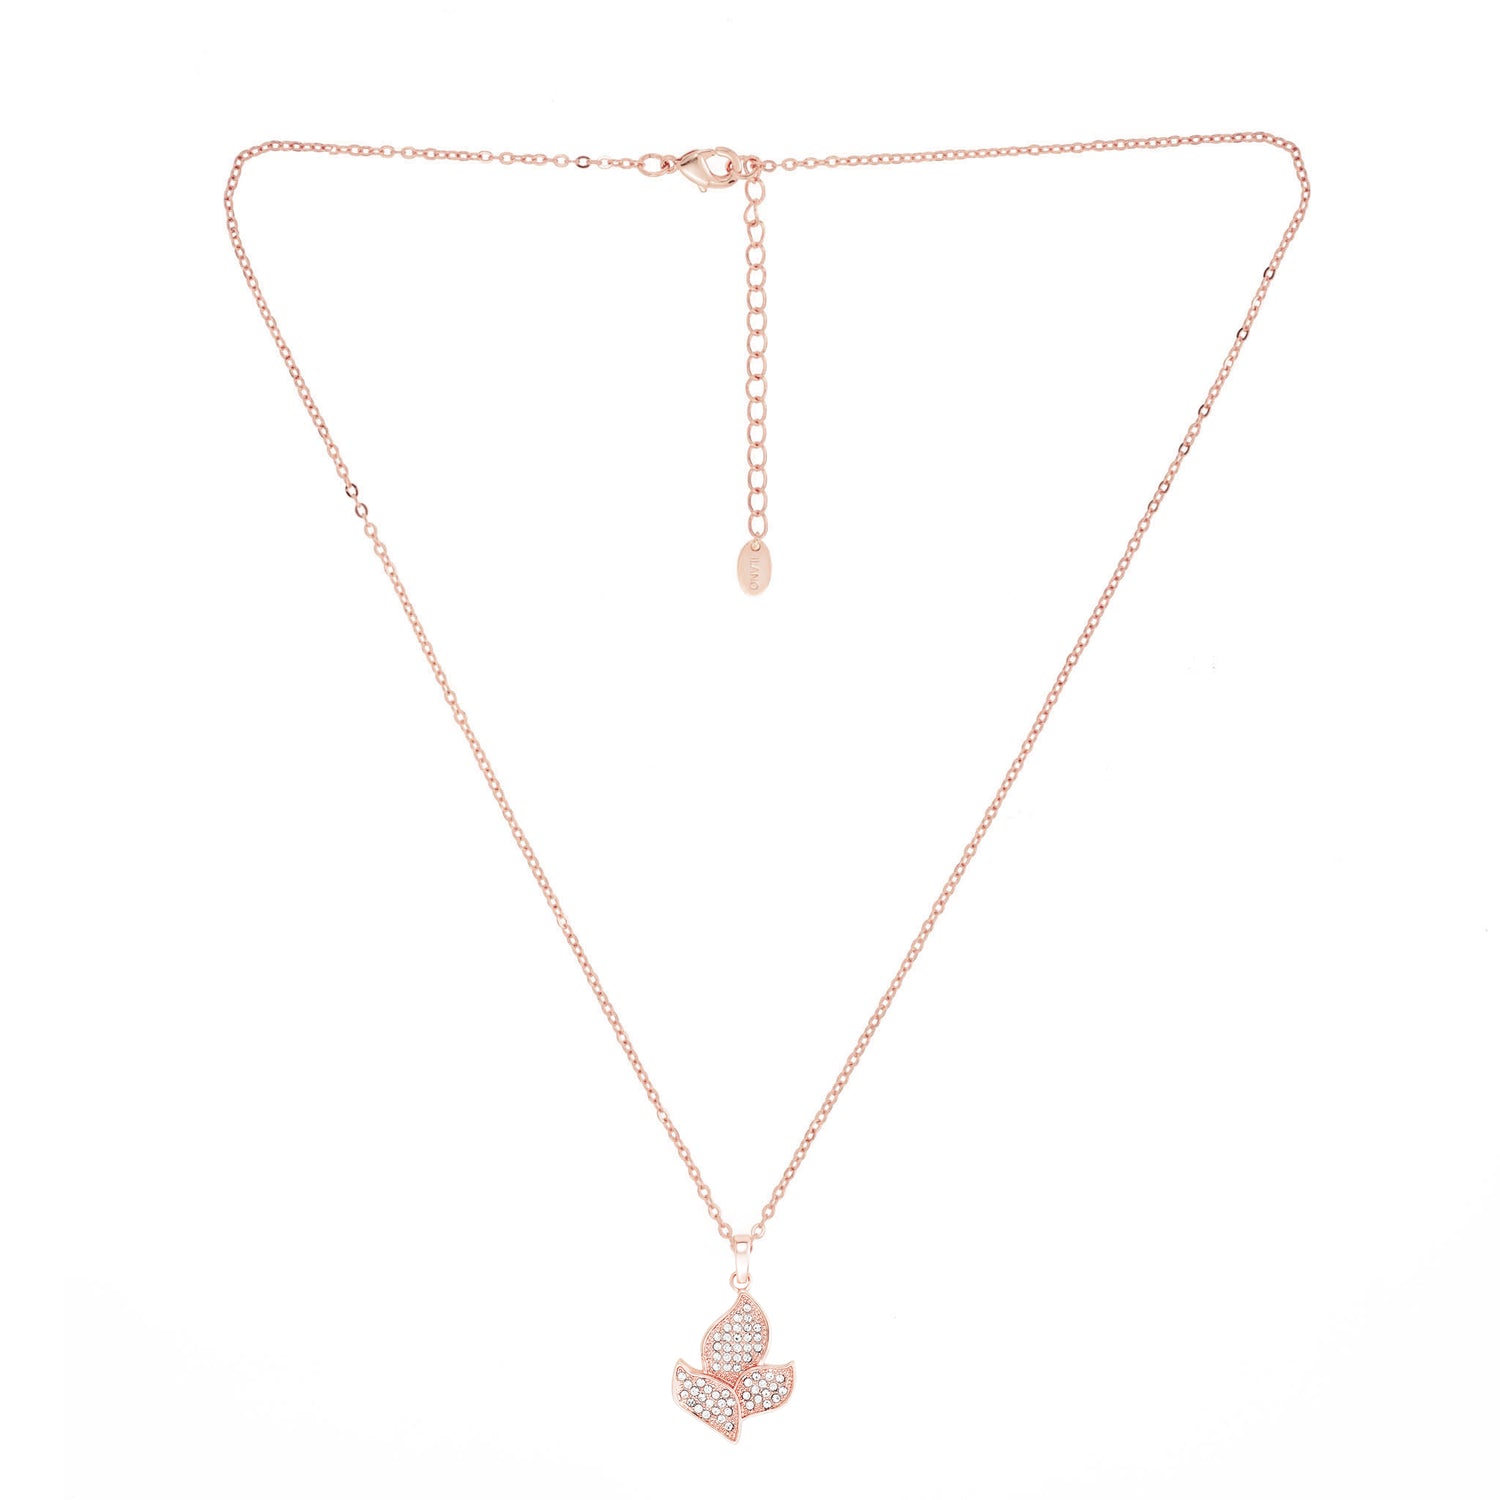 ROSE GOLD NECKLACE